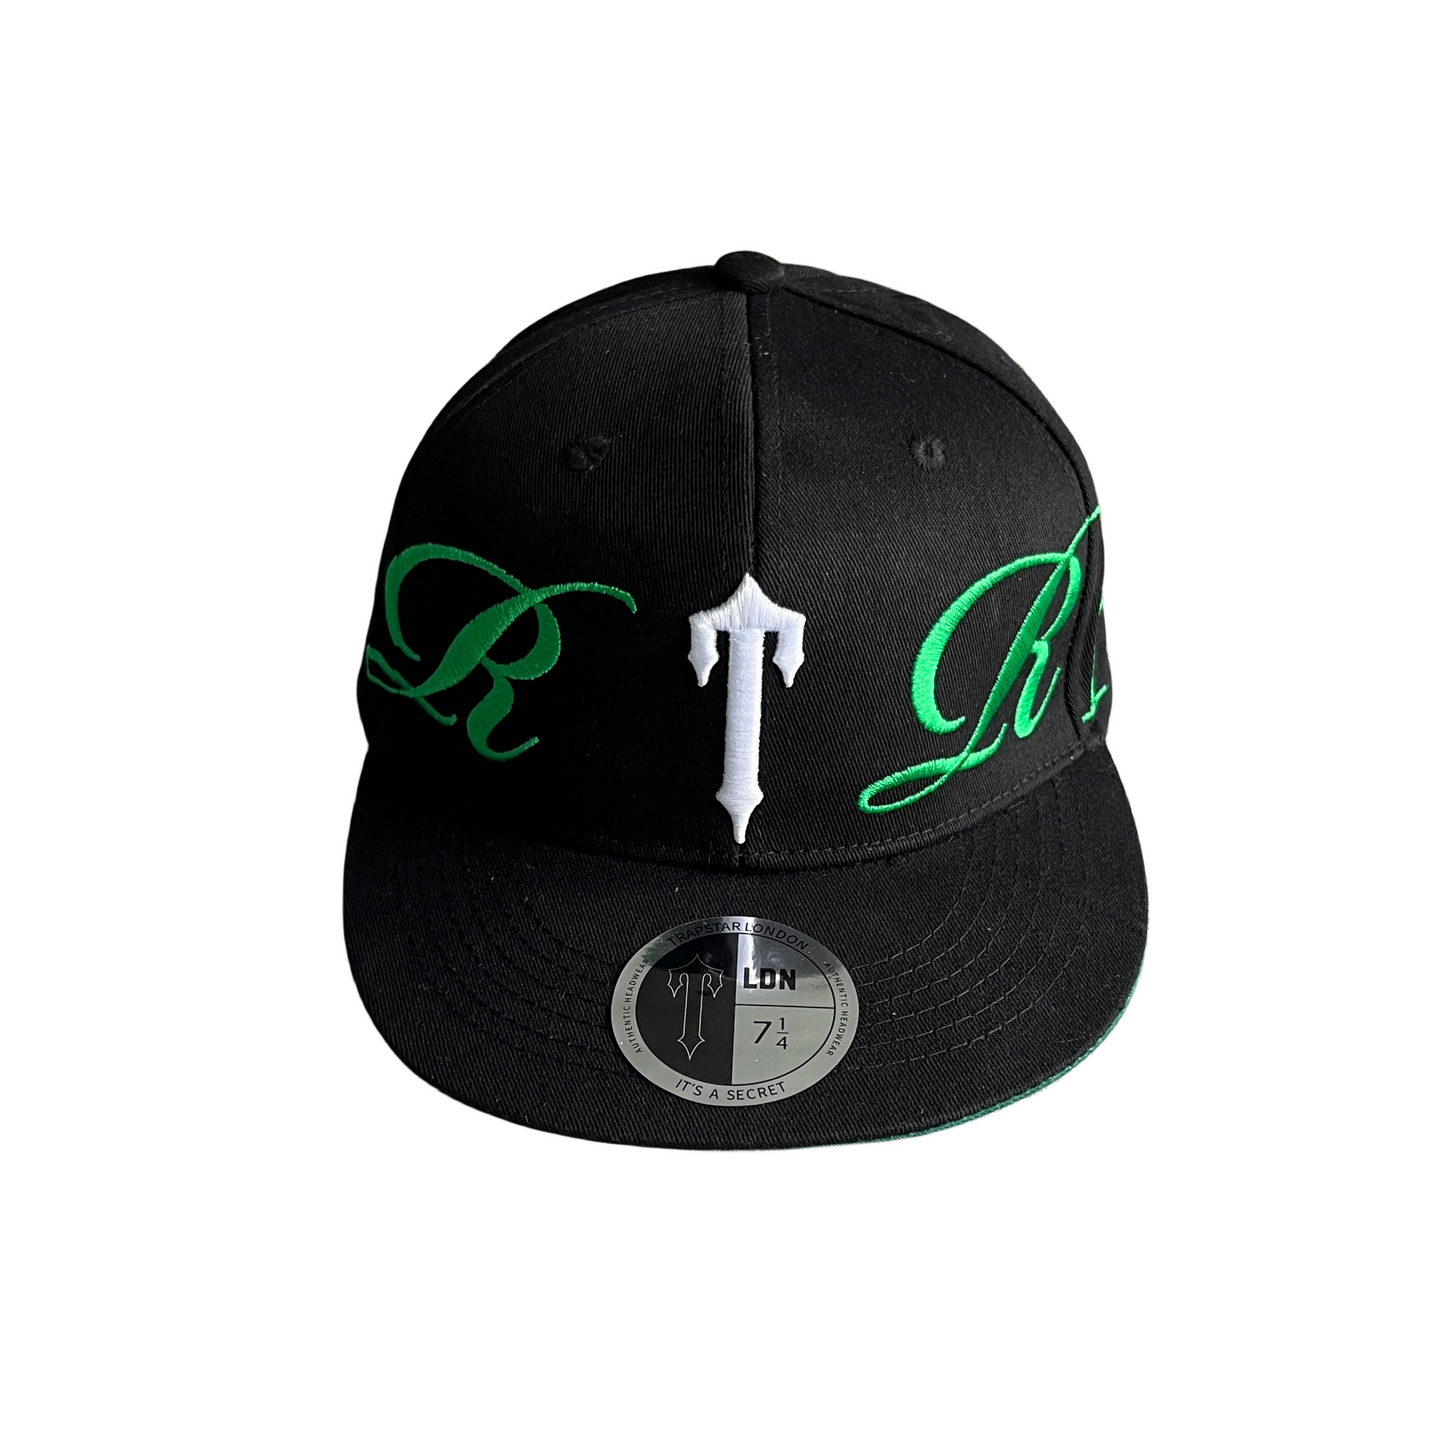 Trapstar Script Fitted Hat - Black/Green